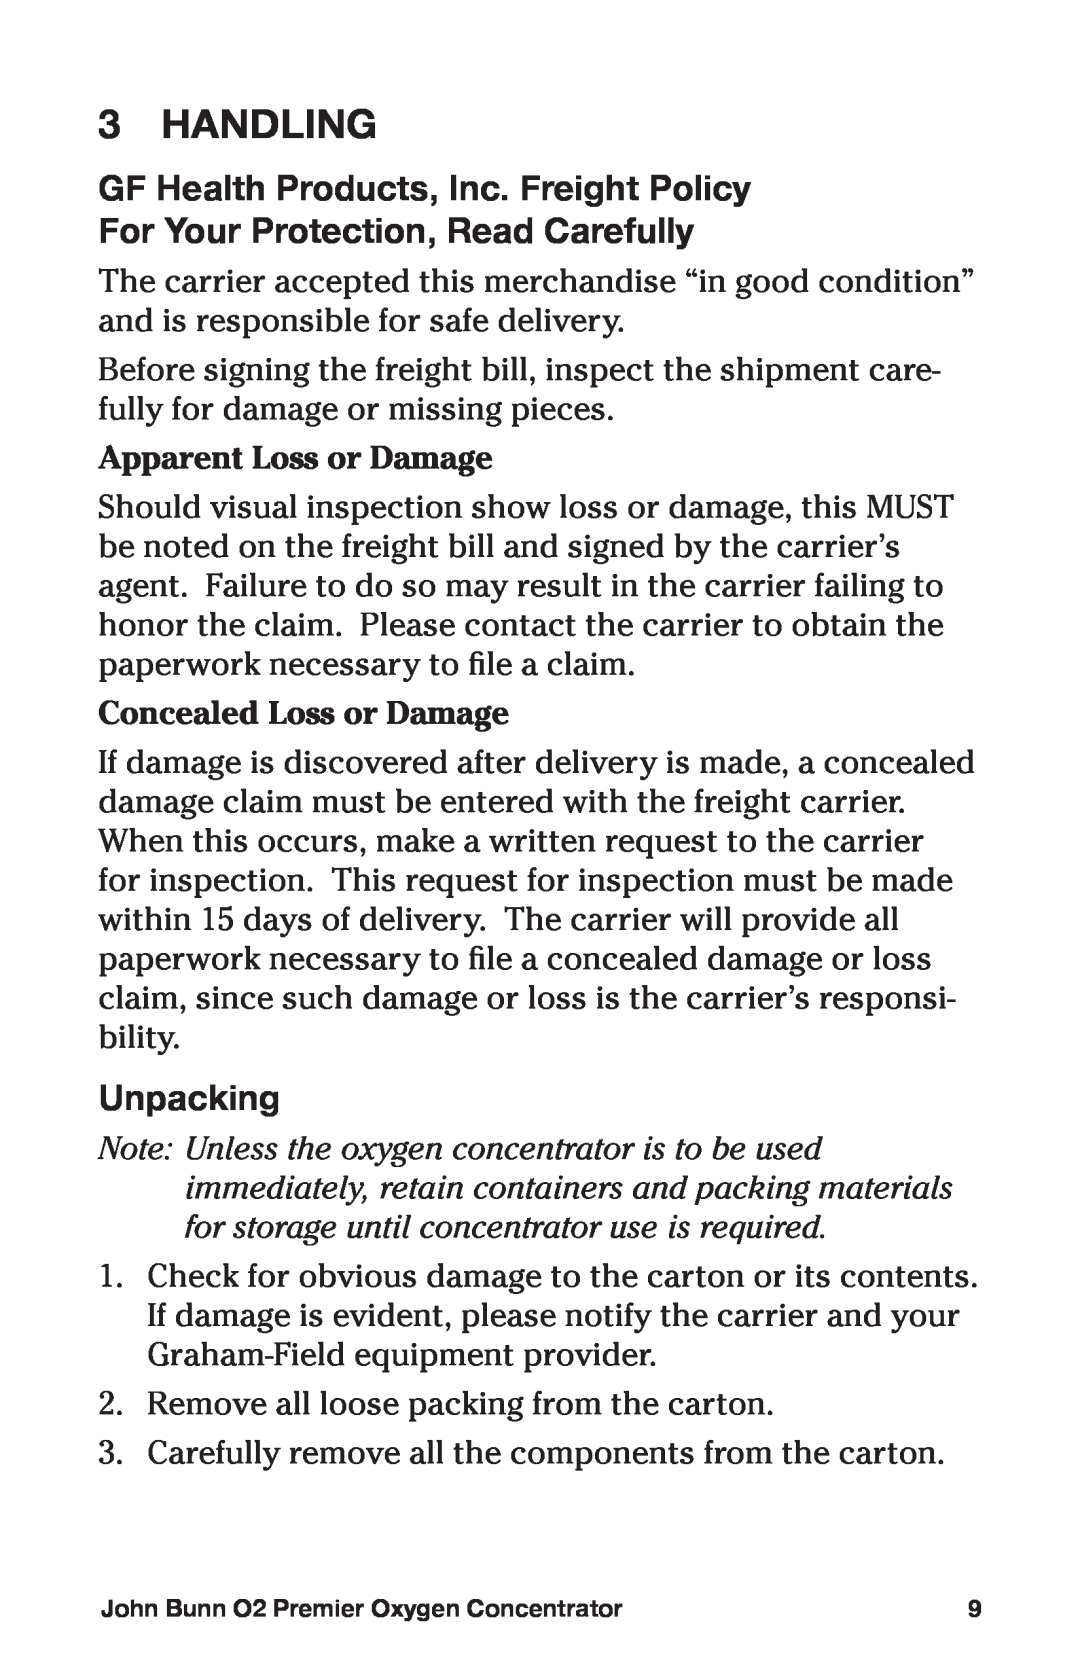 Graham Field JB0160-015 Handling, GF Health Products, Inc. Freight Policy, For Your Protection, Read Carefully, Unpacking 